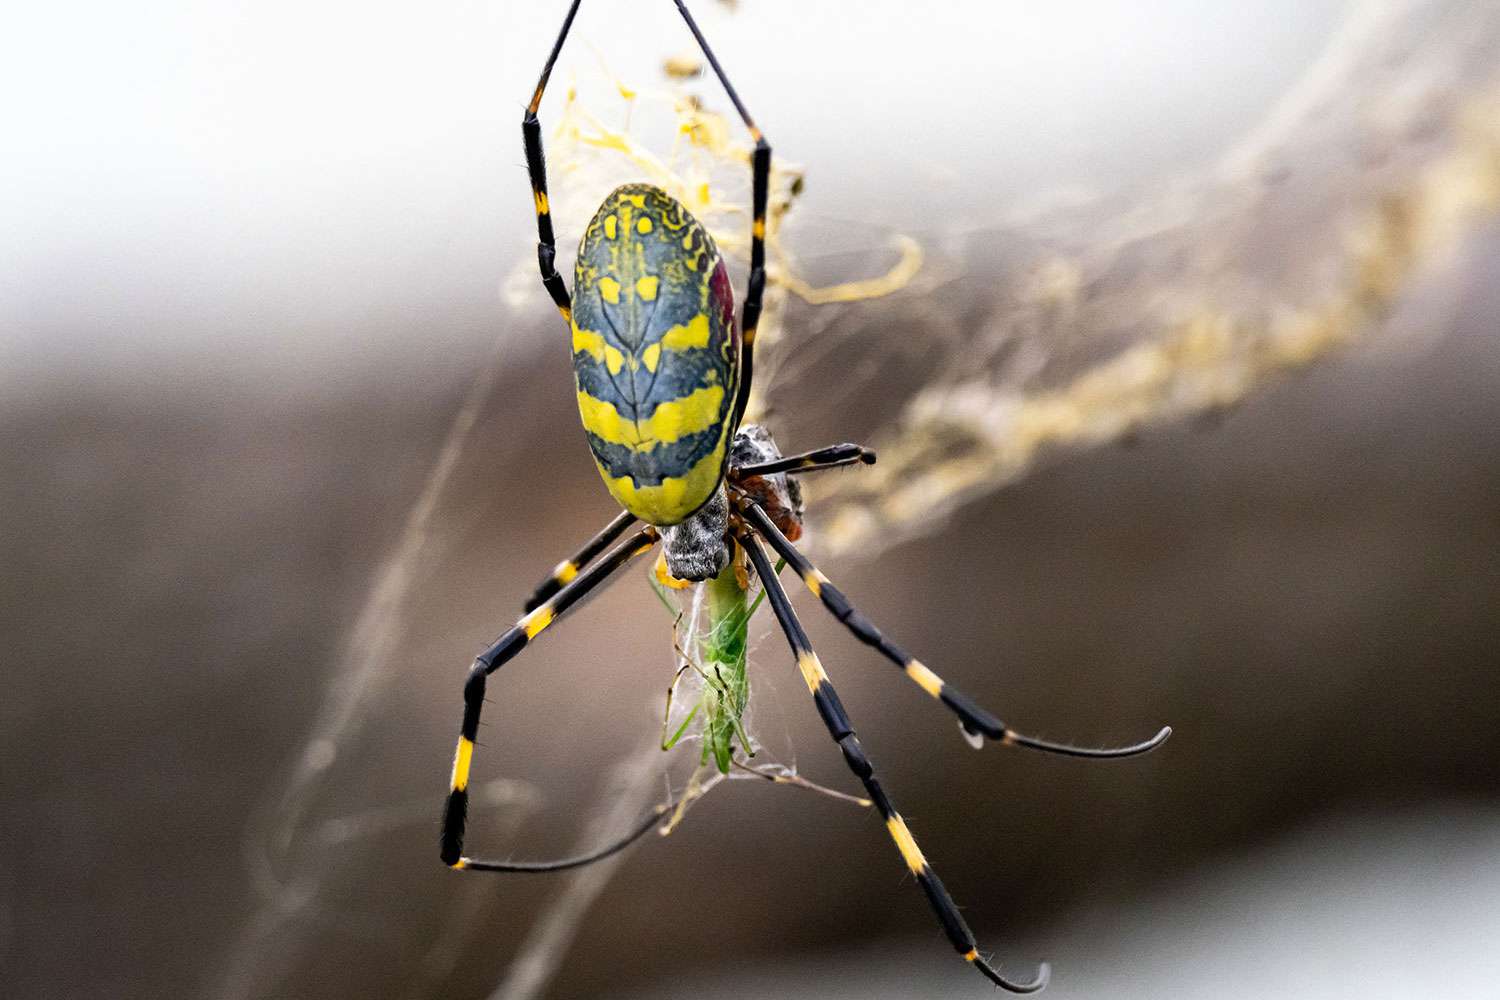 Venomous Flying Spiders May Soon Invade the East Coast, Experts Say